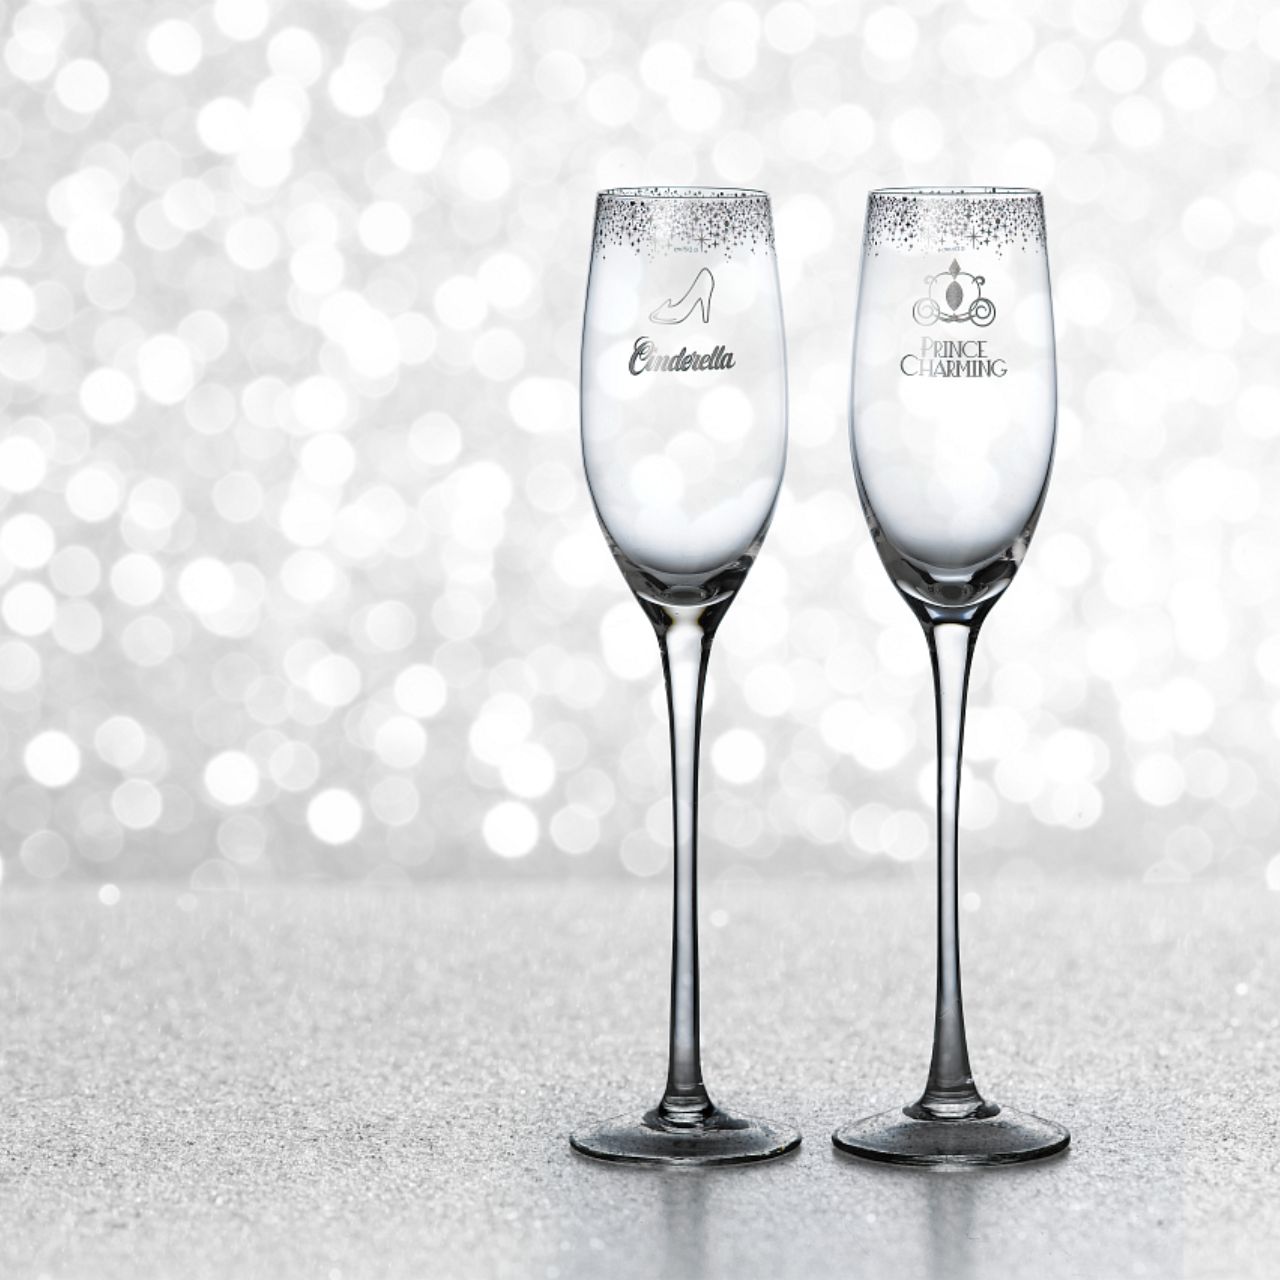 Disney Cinderella Wedding Toasting Glasses  Raise a toast in Disney style with our Cinderella and Prince Charming glasses. The set of two glasses are the perfect gift and keepsake for the happy couple to use for their fairy tale wedding.